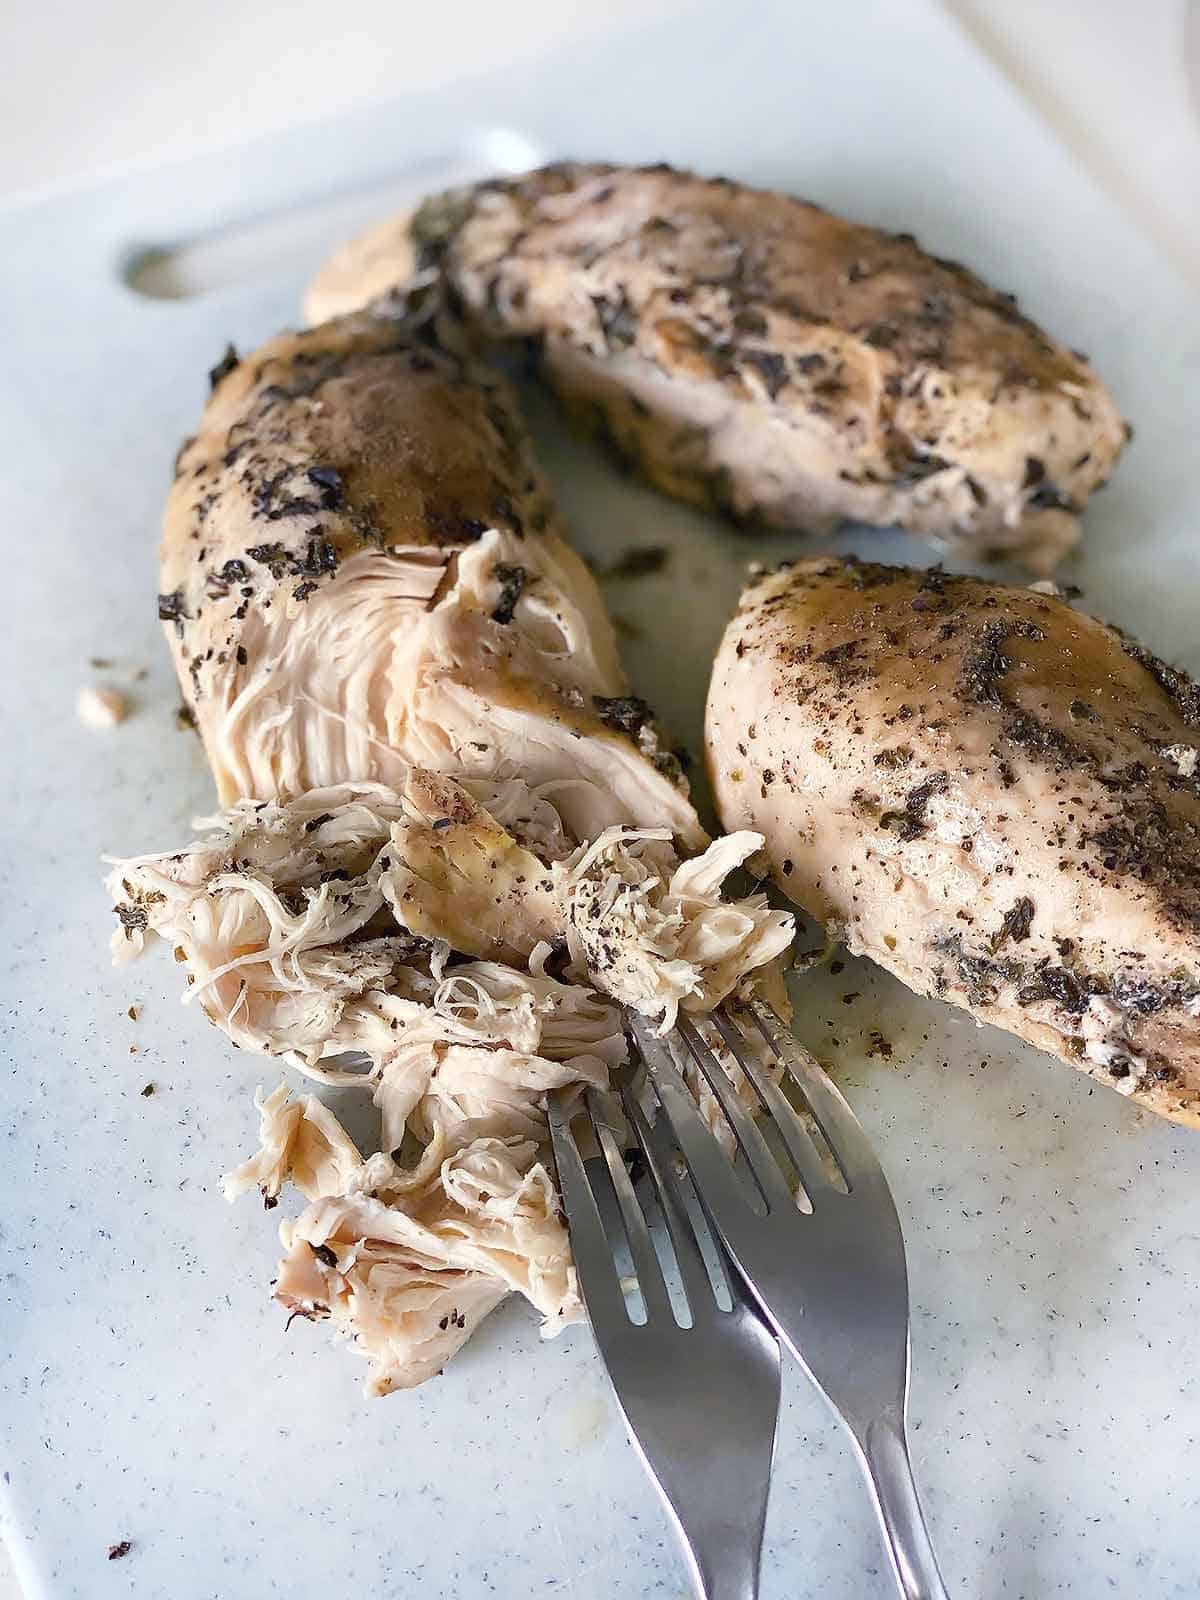 Shredding chicken breasts on a cutting board with two forks.